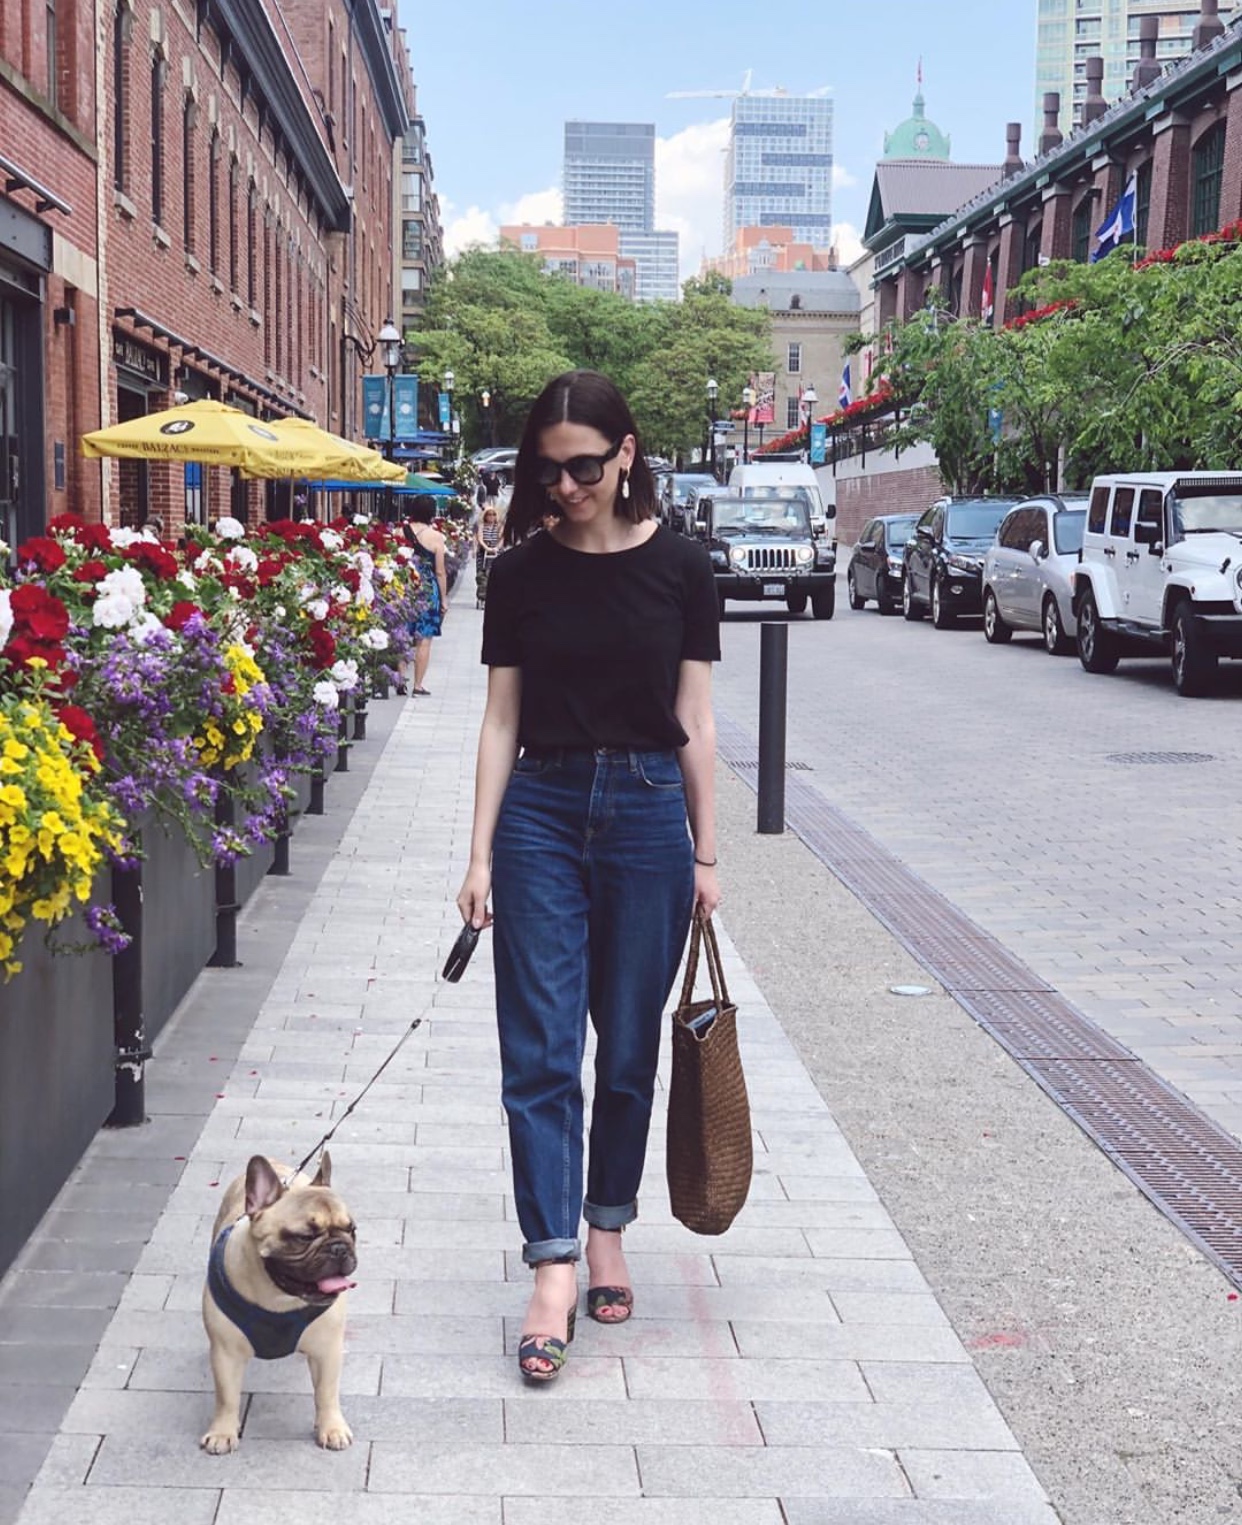 A woman walking in the street with her French Bulldog on a leash